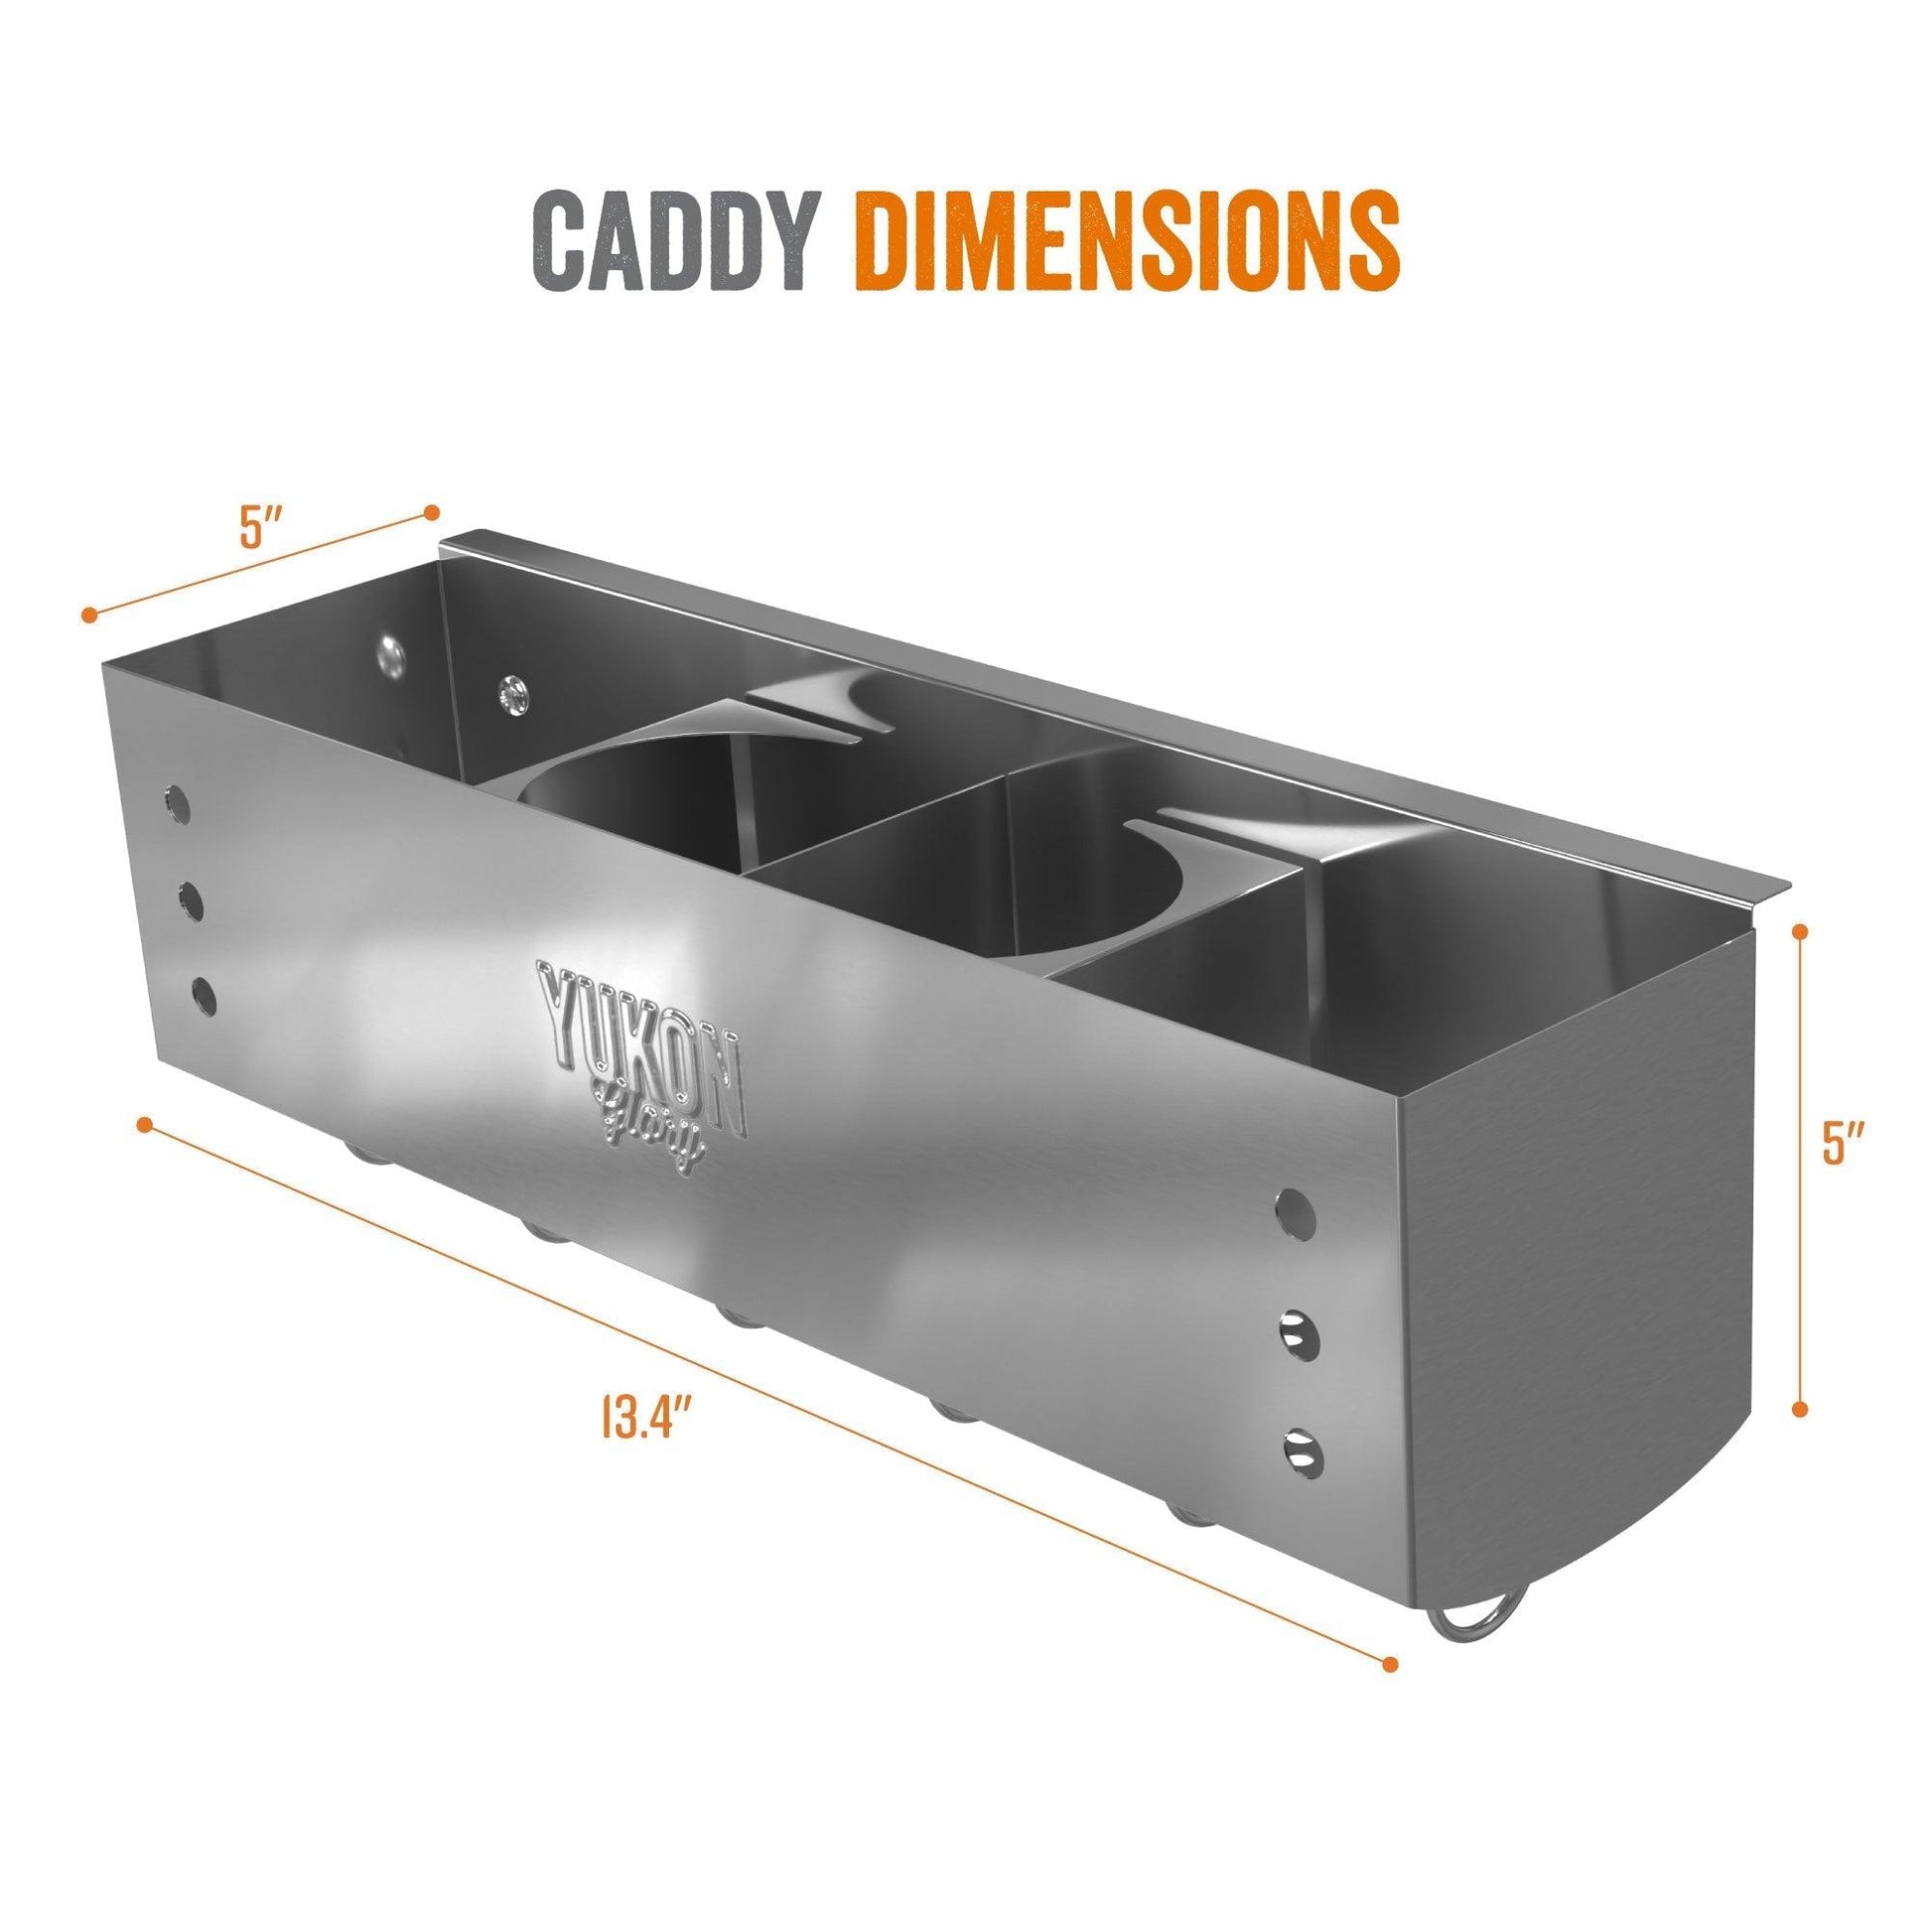 Yukon Glory Griddle Caddy Designed for Blackstone 1517 and 1825 Griddles